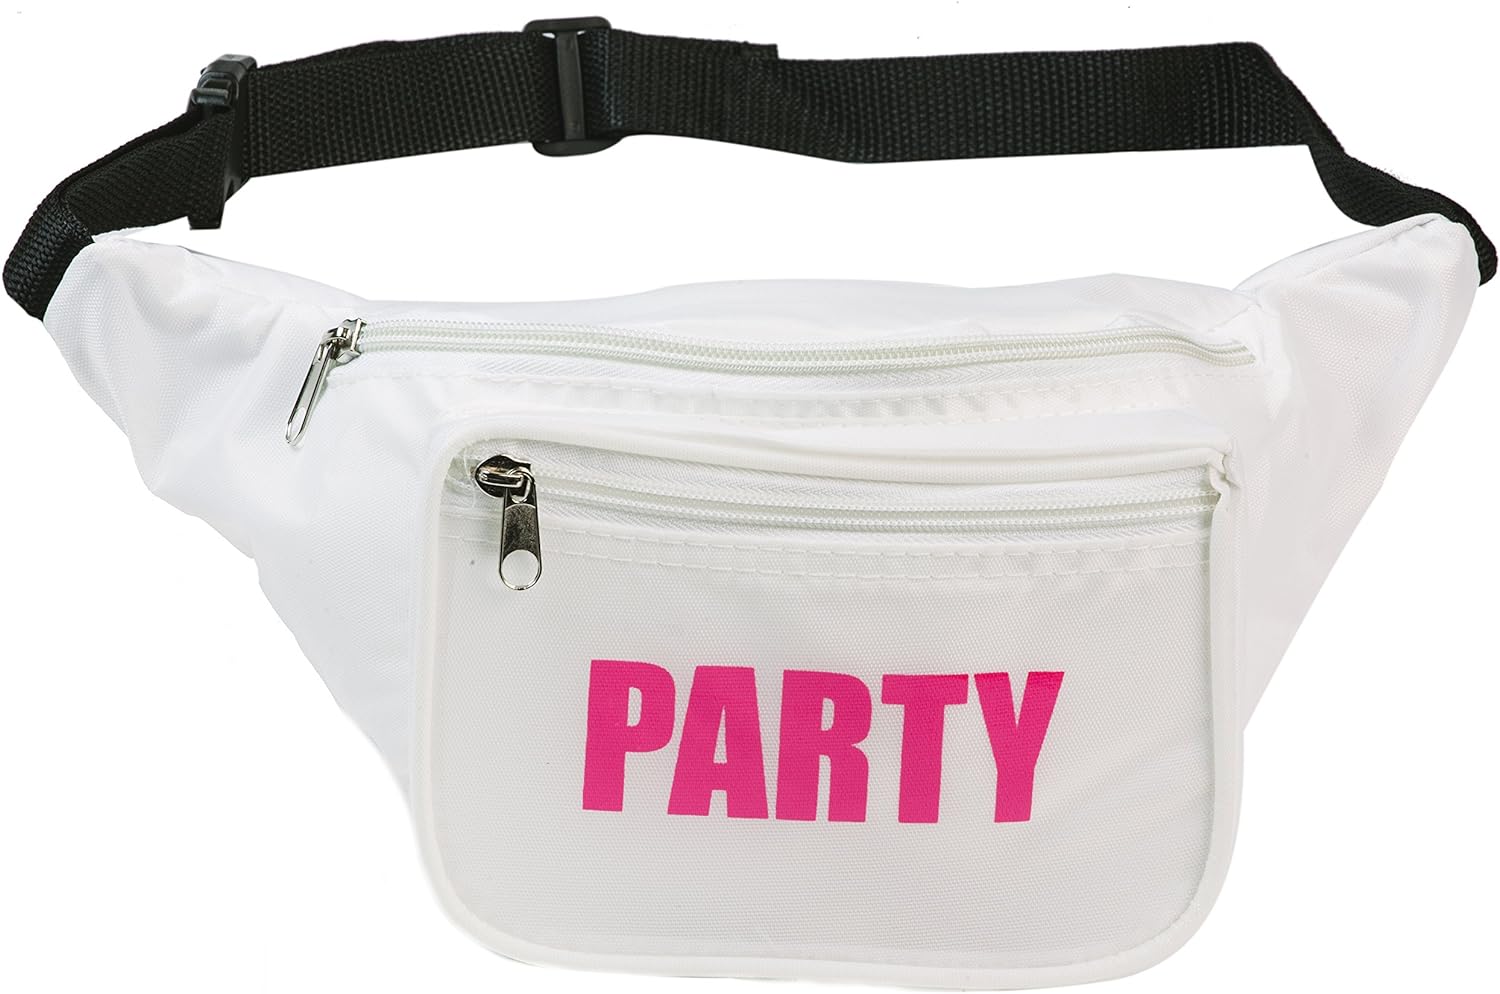 PARTY Fanny Pack, White